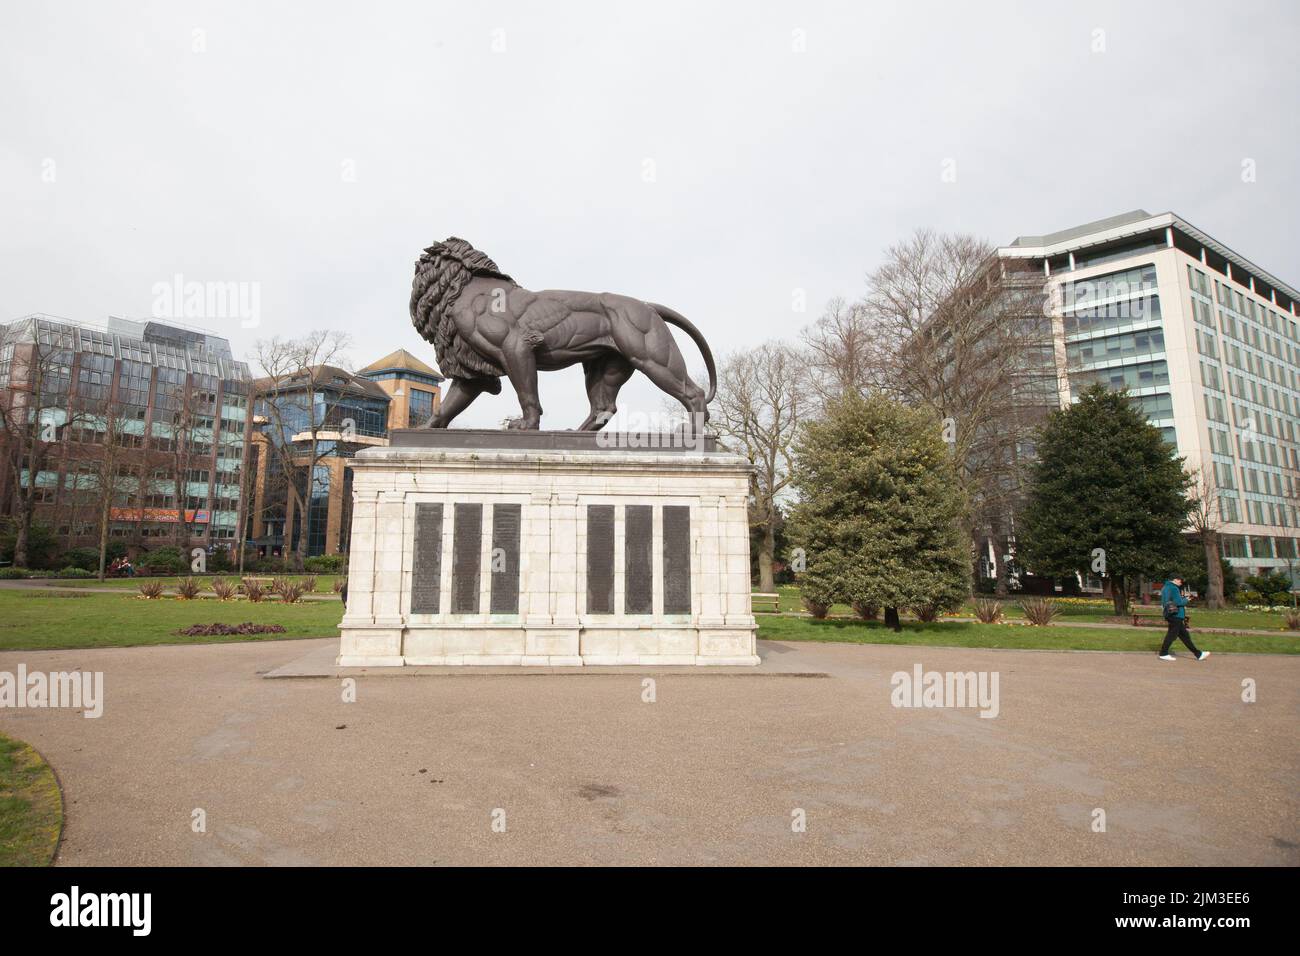 The Maiwand Lion, War Memorial in Forbury Gardens, Reading, Berkshire in the UK Stock Photo